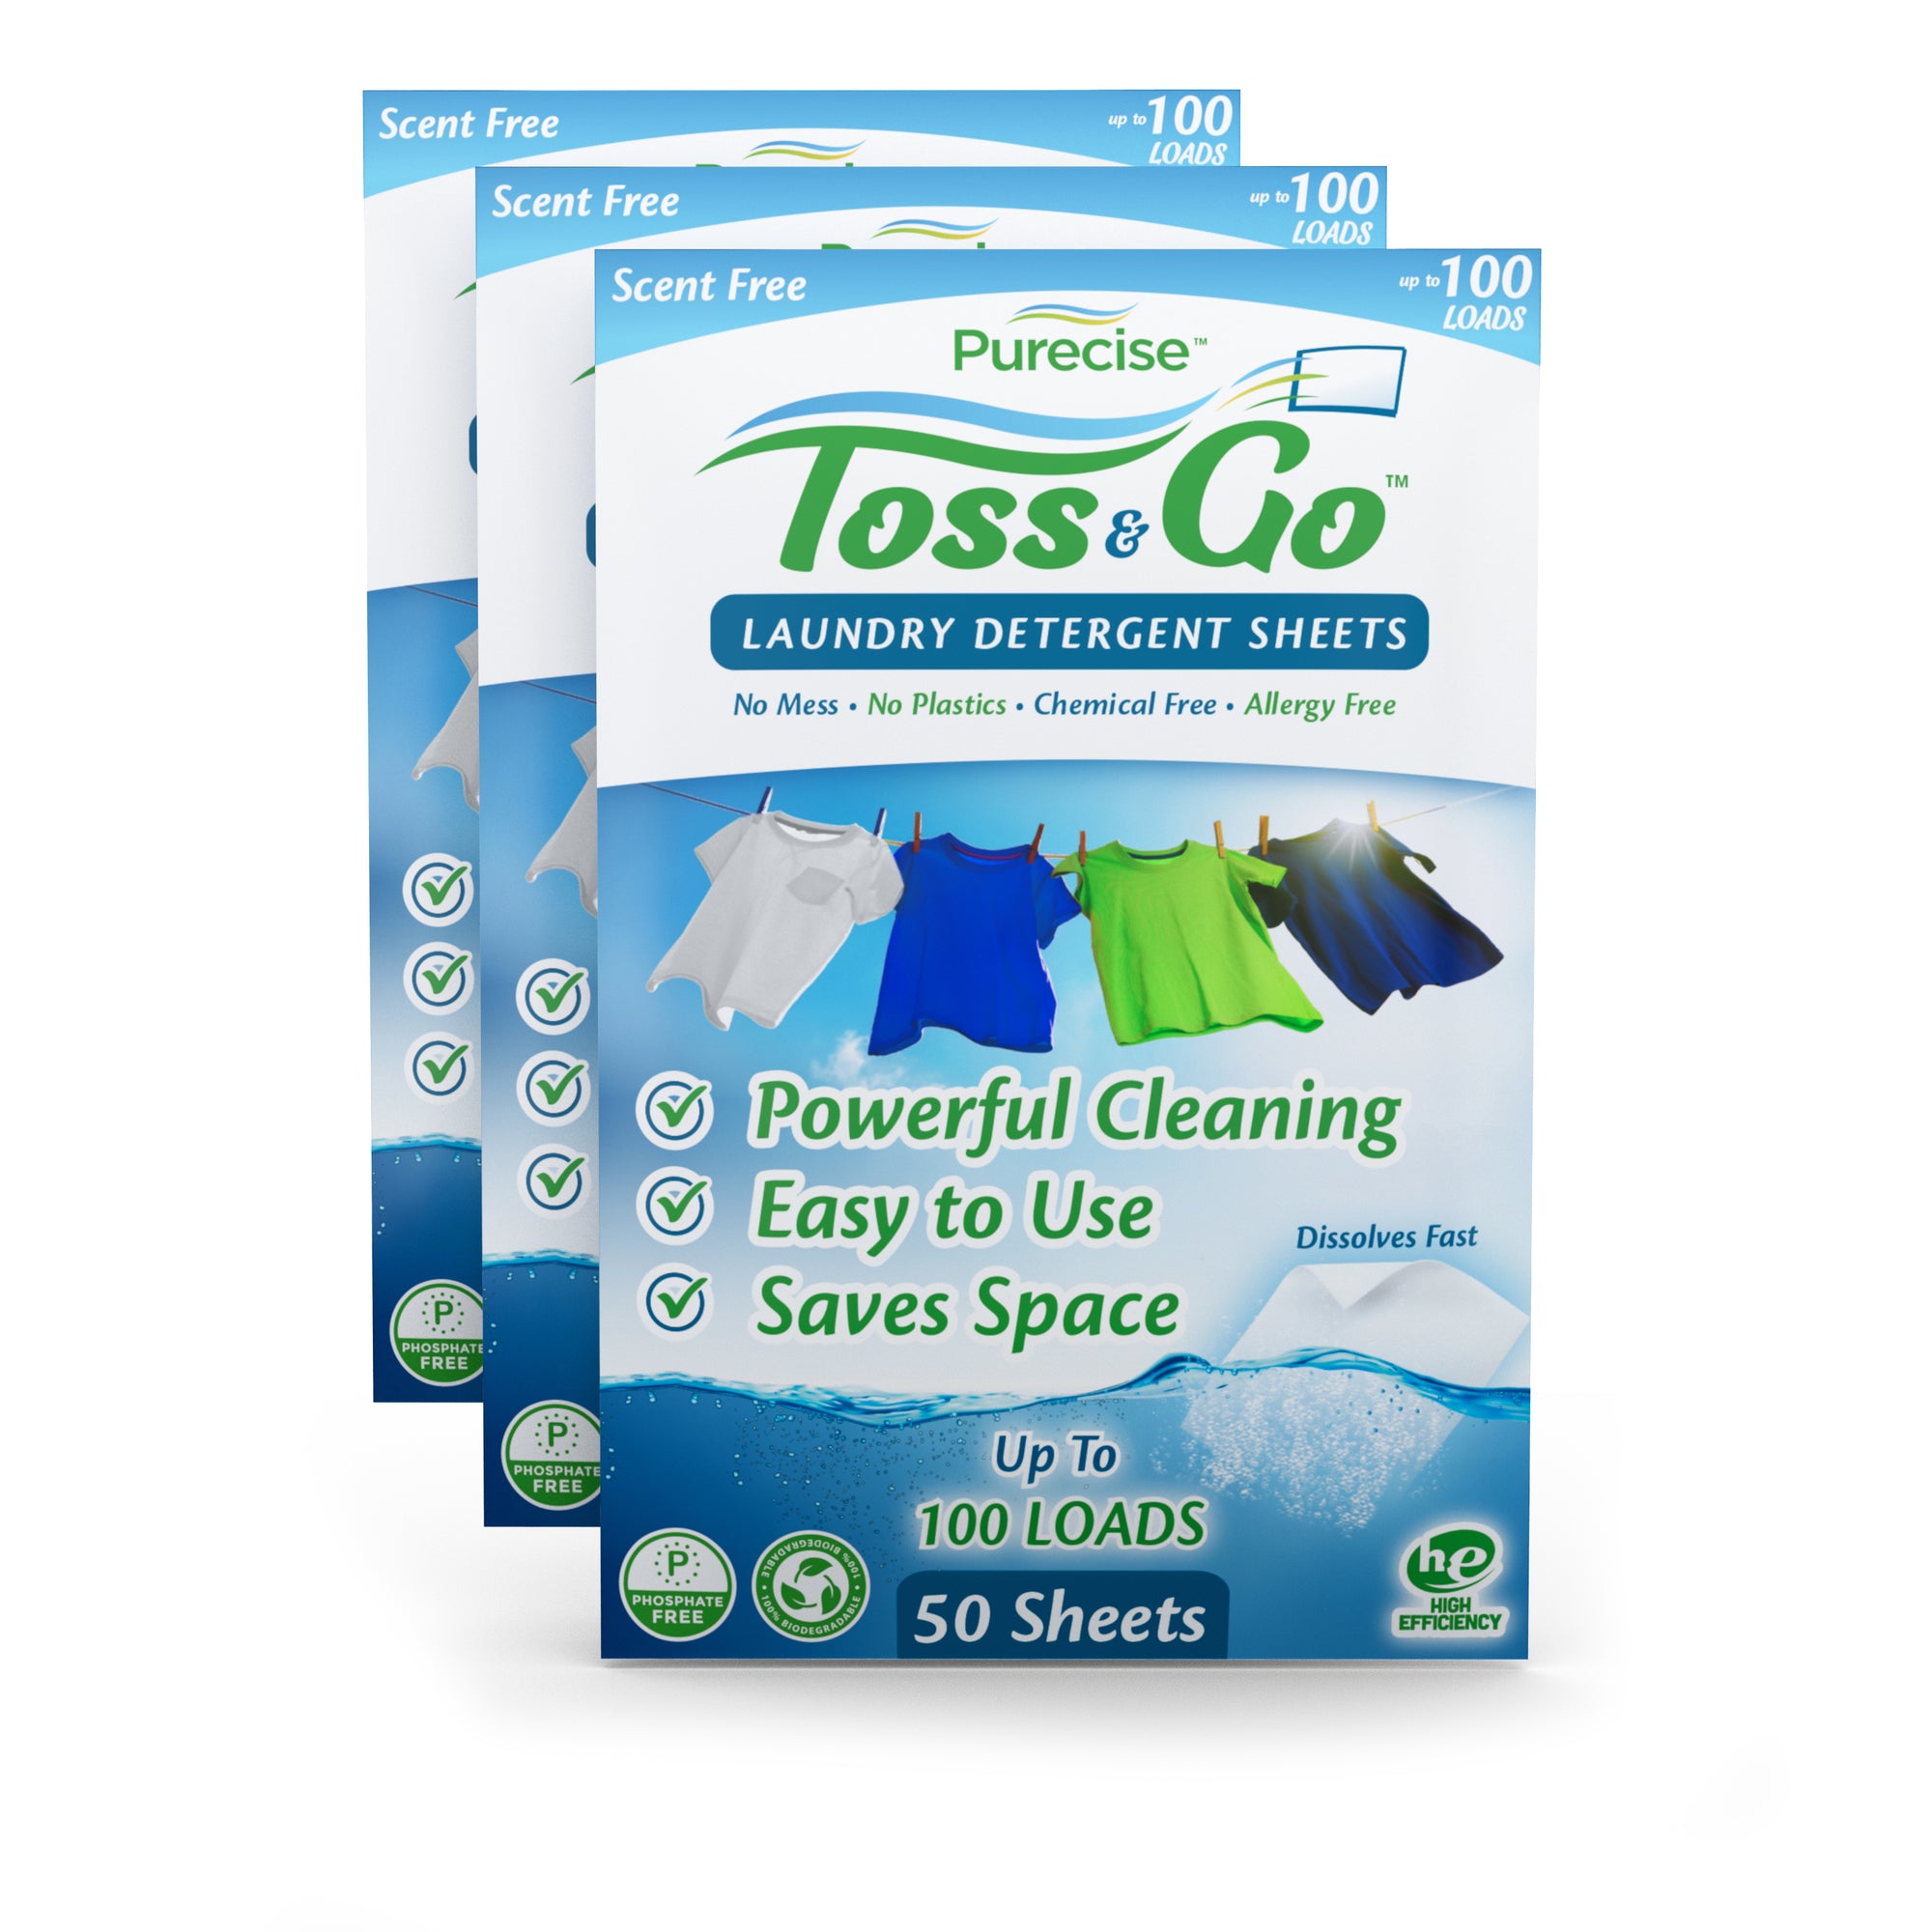 Toss & Go Laundry Detergent Sheets Travel Packs by Purecise